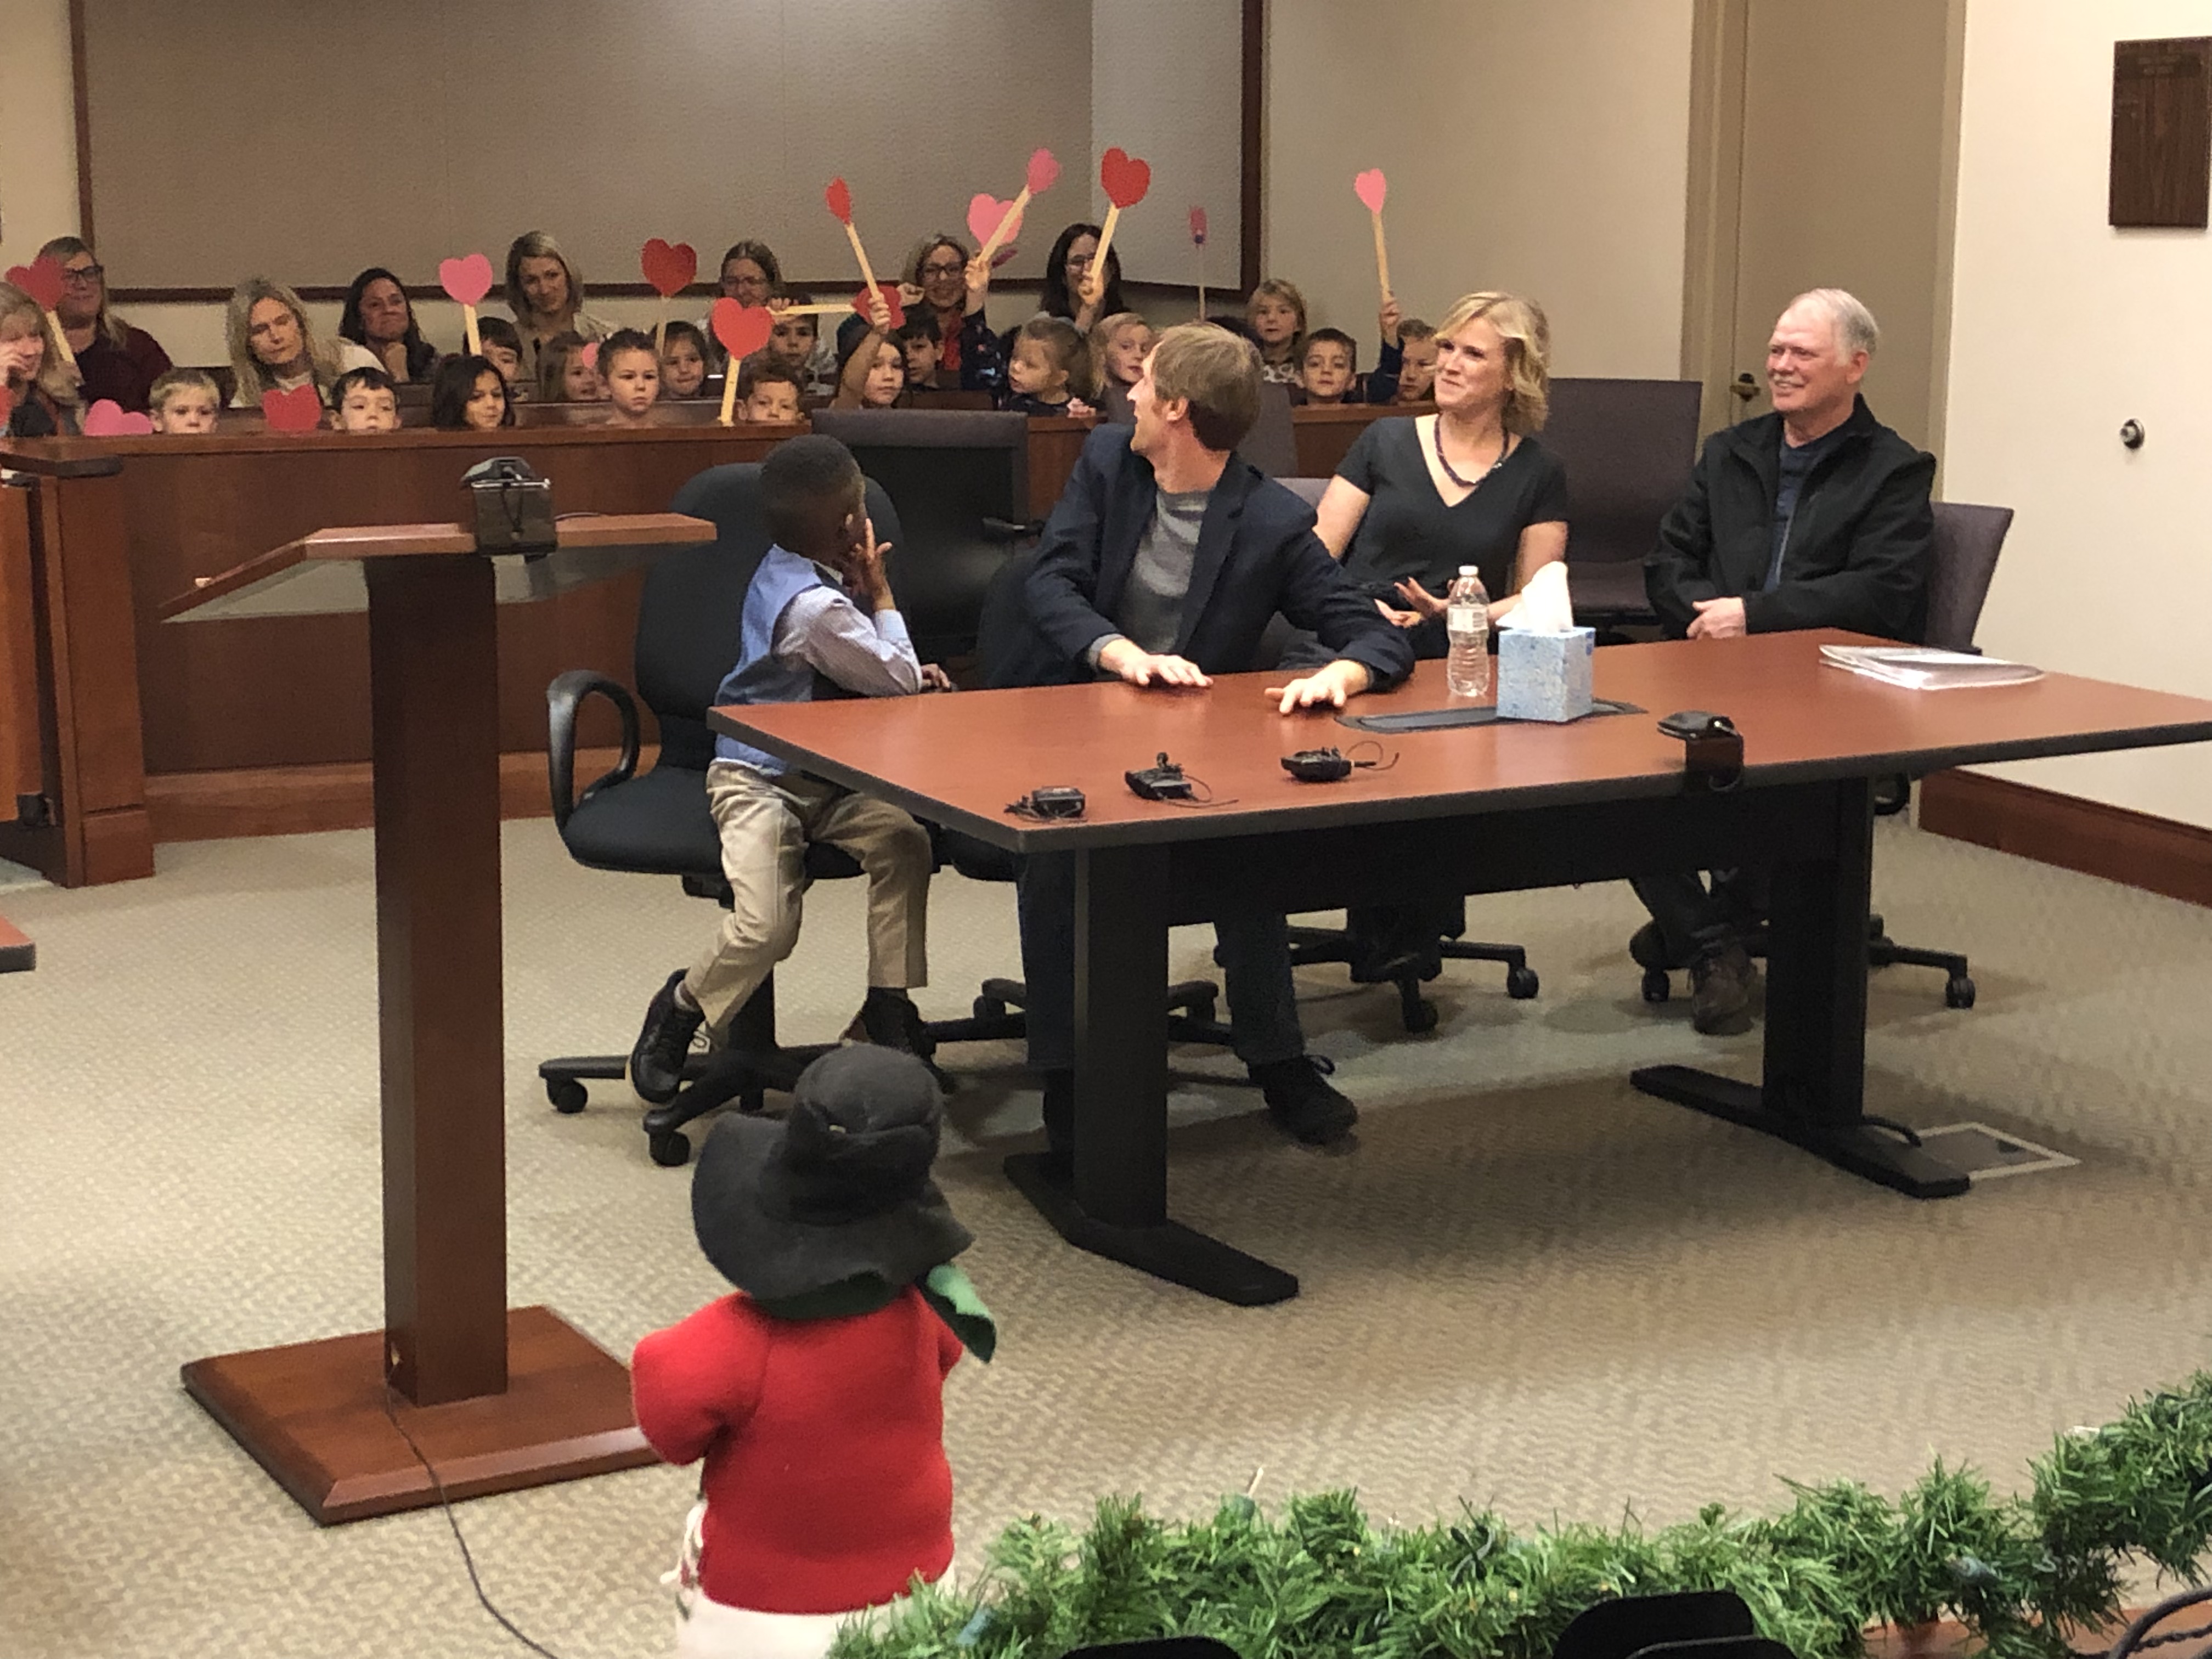 Michael with his class behind him at an adoption hearing